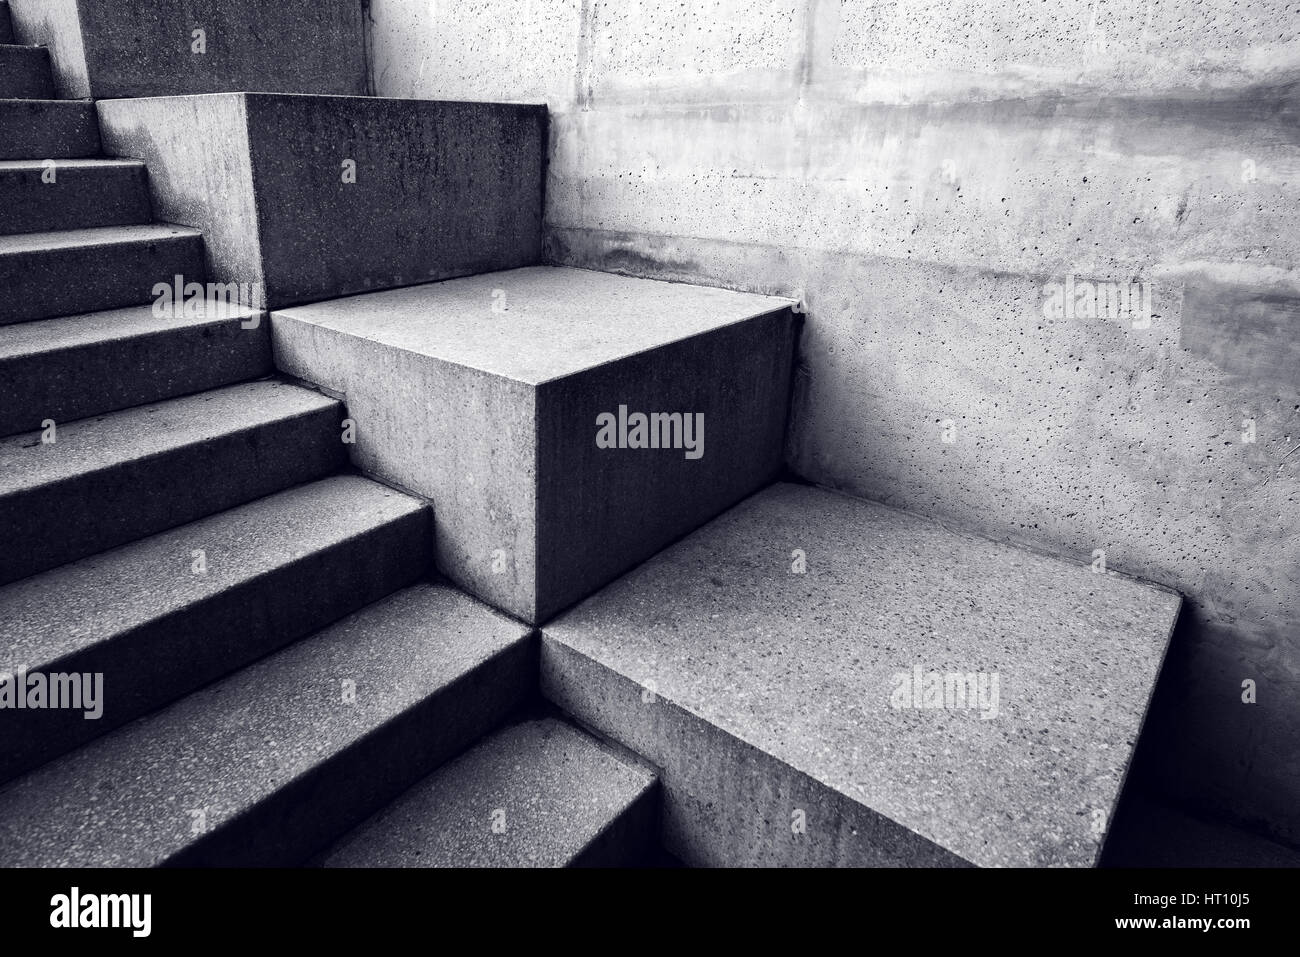 Urban concrete staircase, abstract architectural background, minimalistic lines and shapes with light and shadow Stock Photo